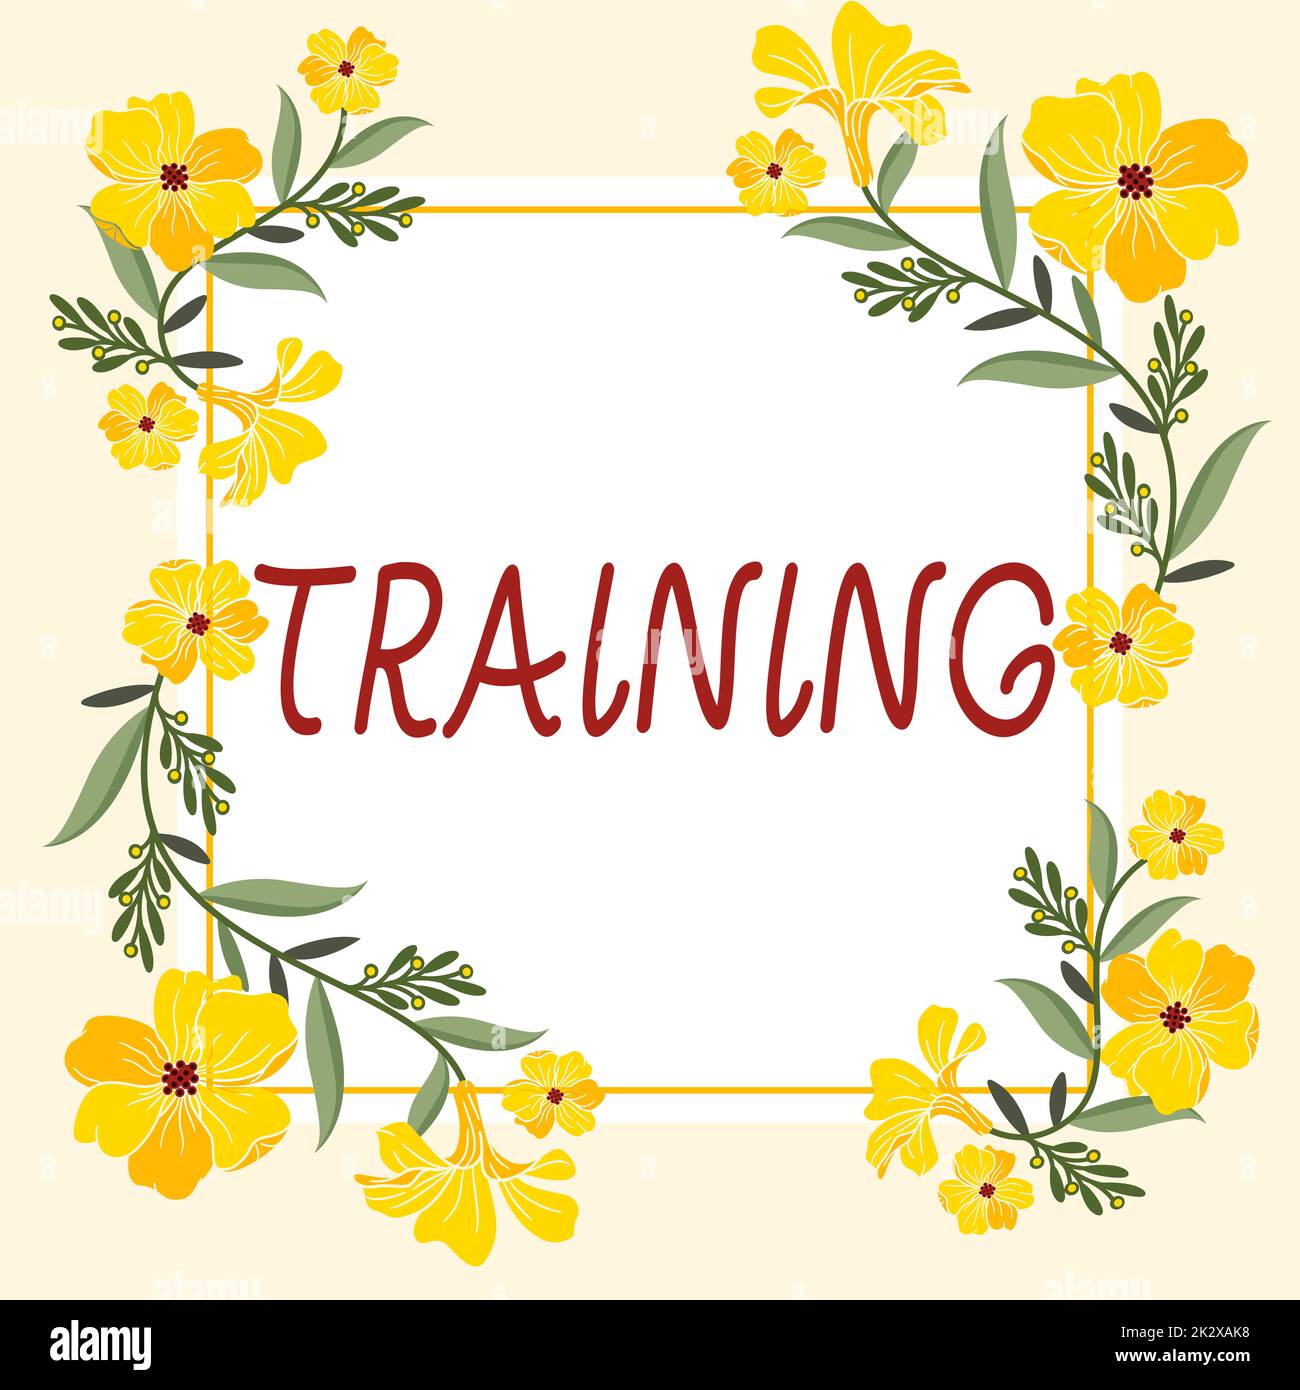 Text caption presenting Training. Business concept An activity occurred when starting a new job project or work Frame Decorated With Colorful Flowers And Foliage Arranged Harmoniously. Stock Photo